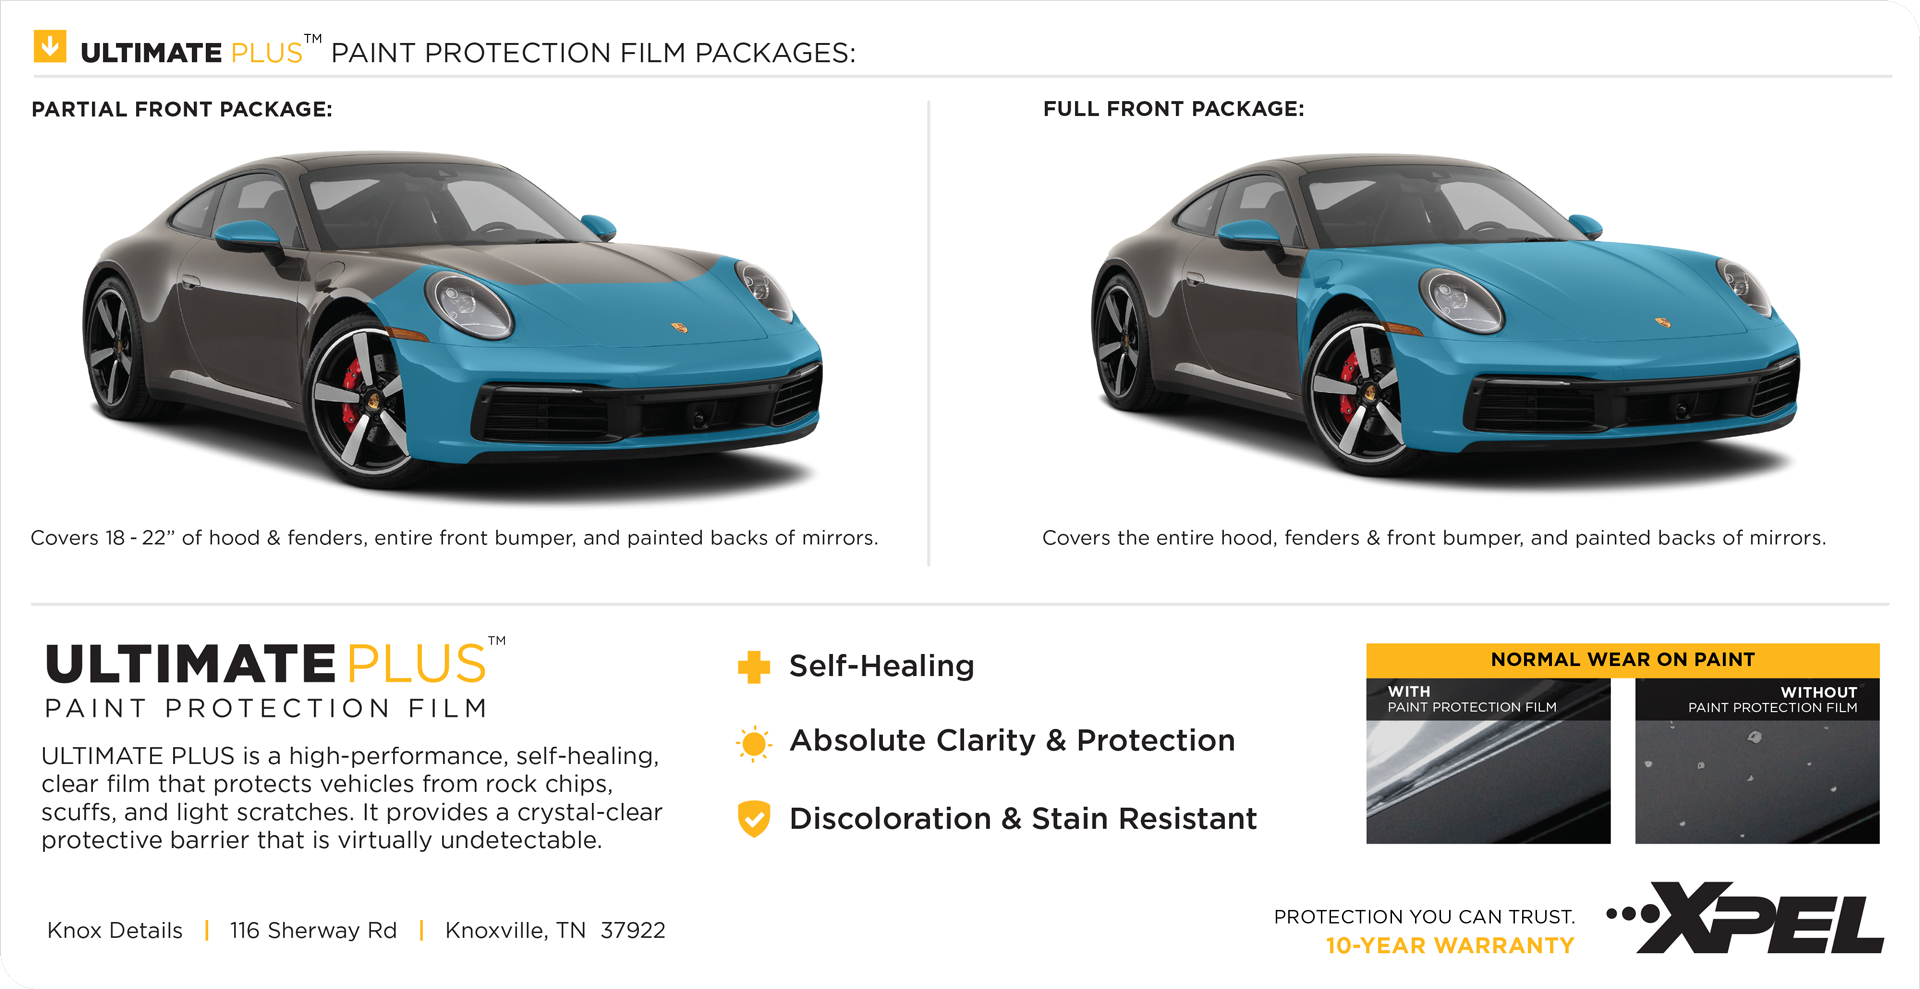 Xpel Ultimate Plus Paint Protection Film detail card